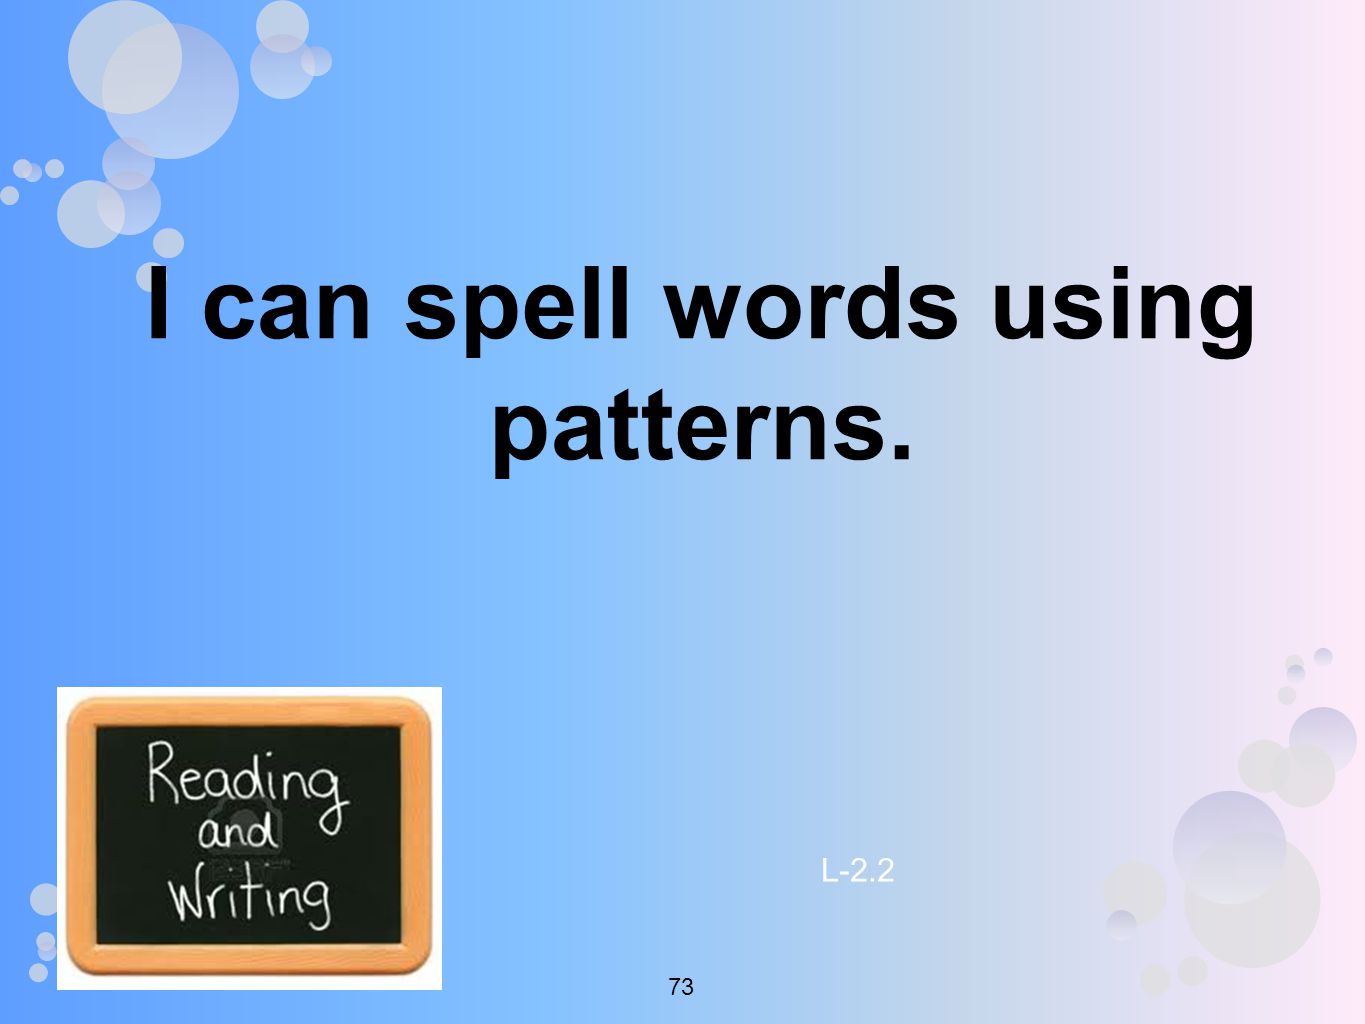 I can spell words using patterns. L